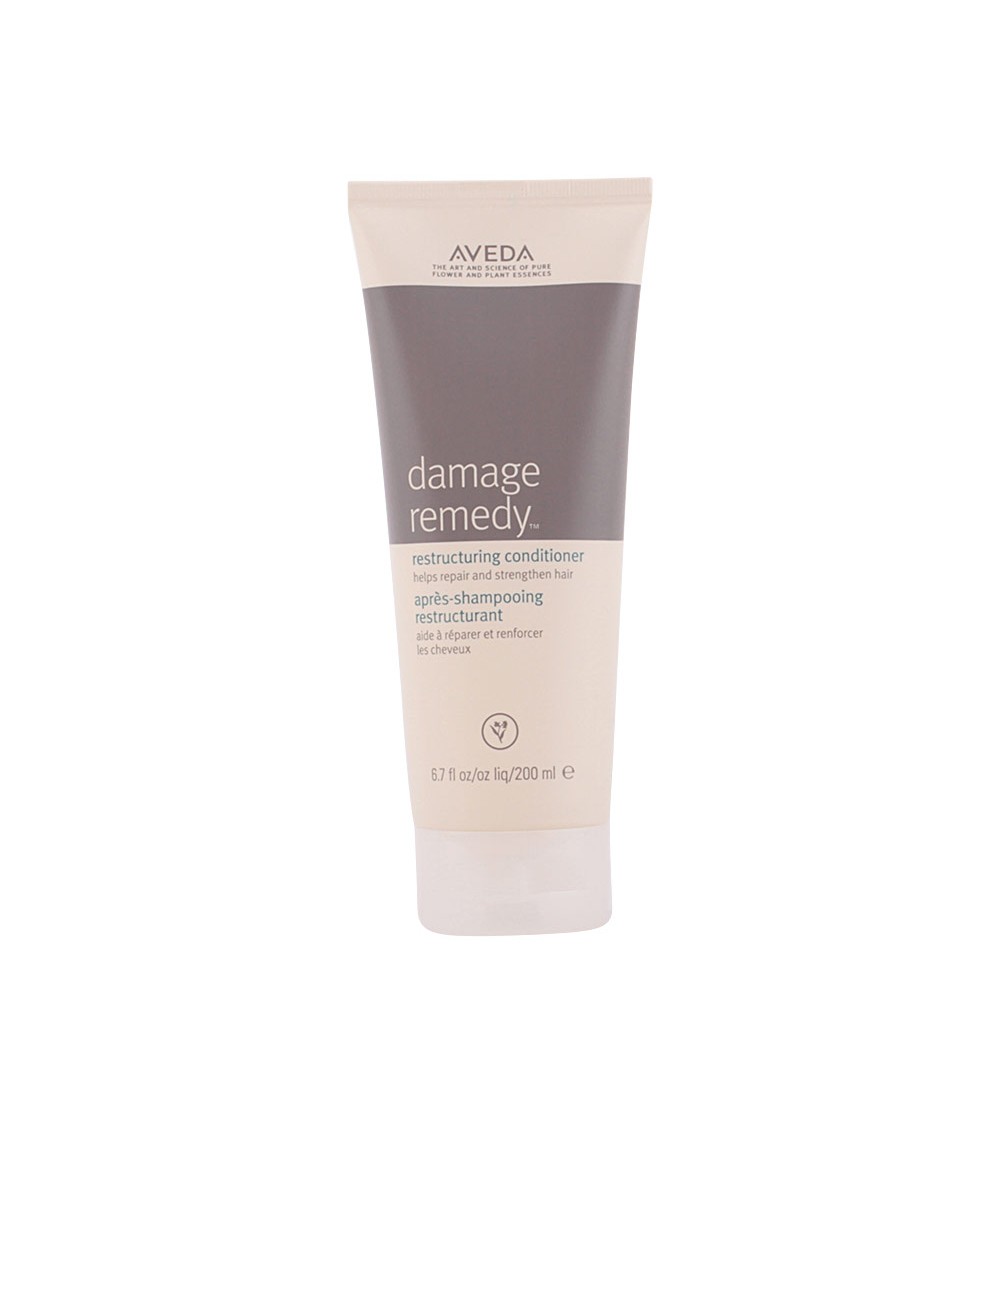 DAMAGE REMEDY après-shampoing restructurant 200 ml